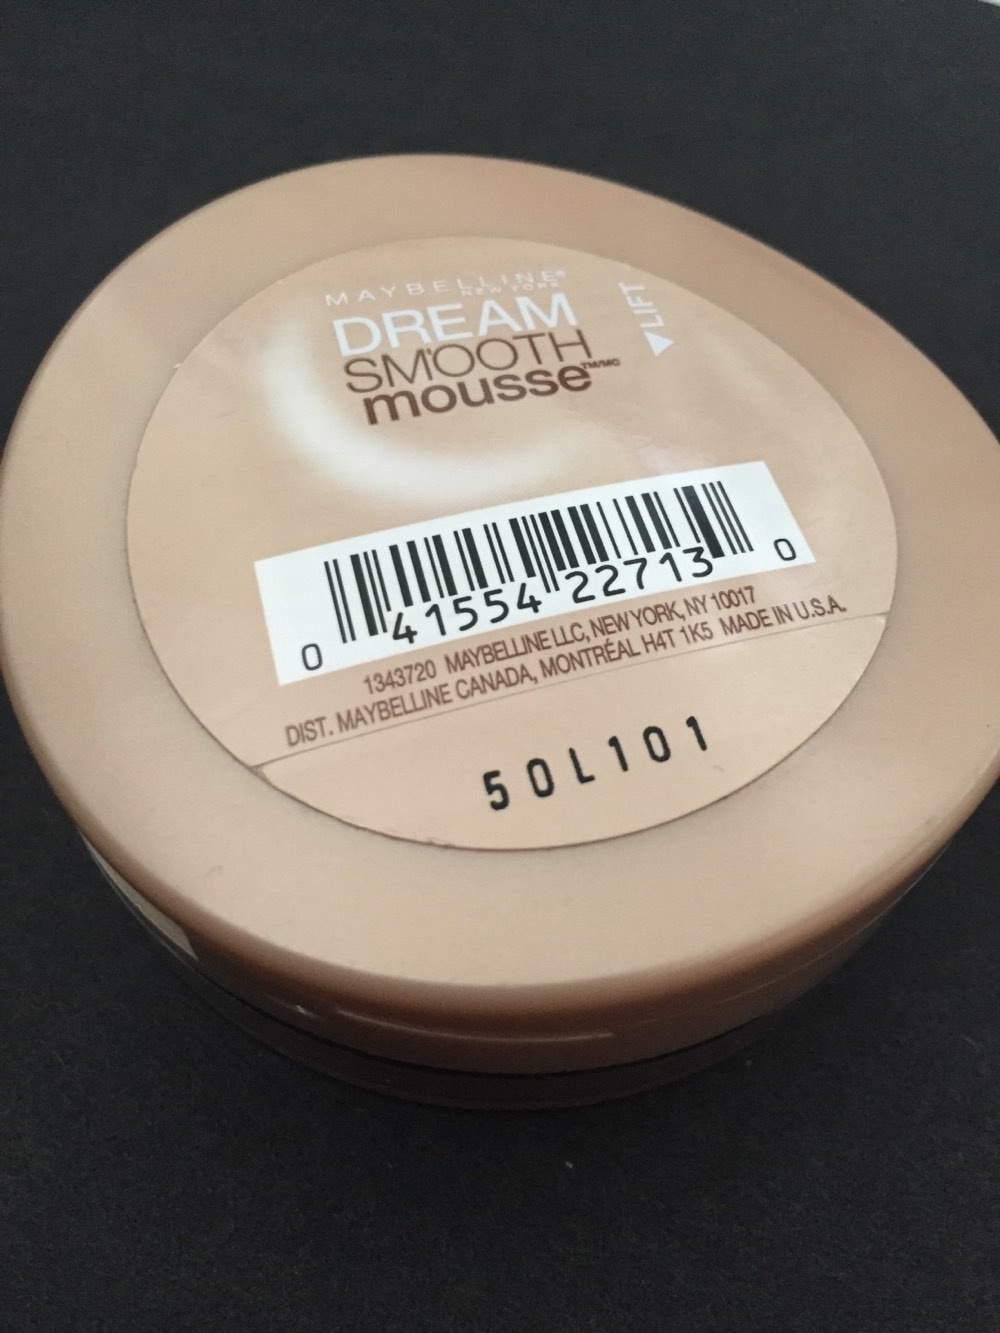 MAYBELLINE Dream Smooth Mousse - Product - en